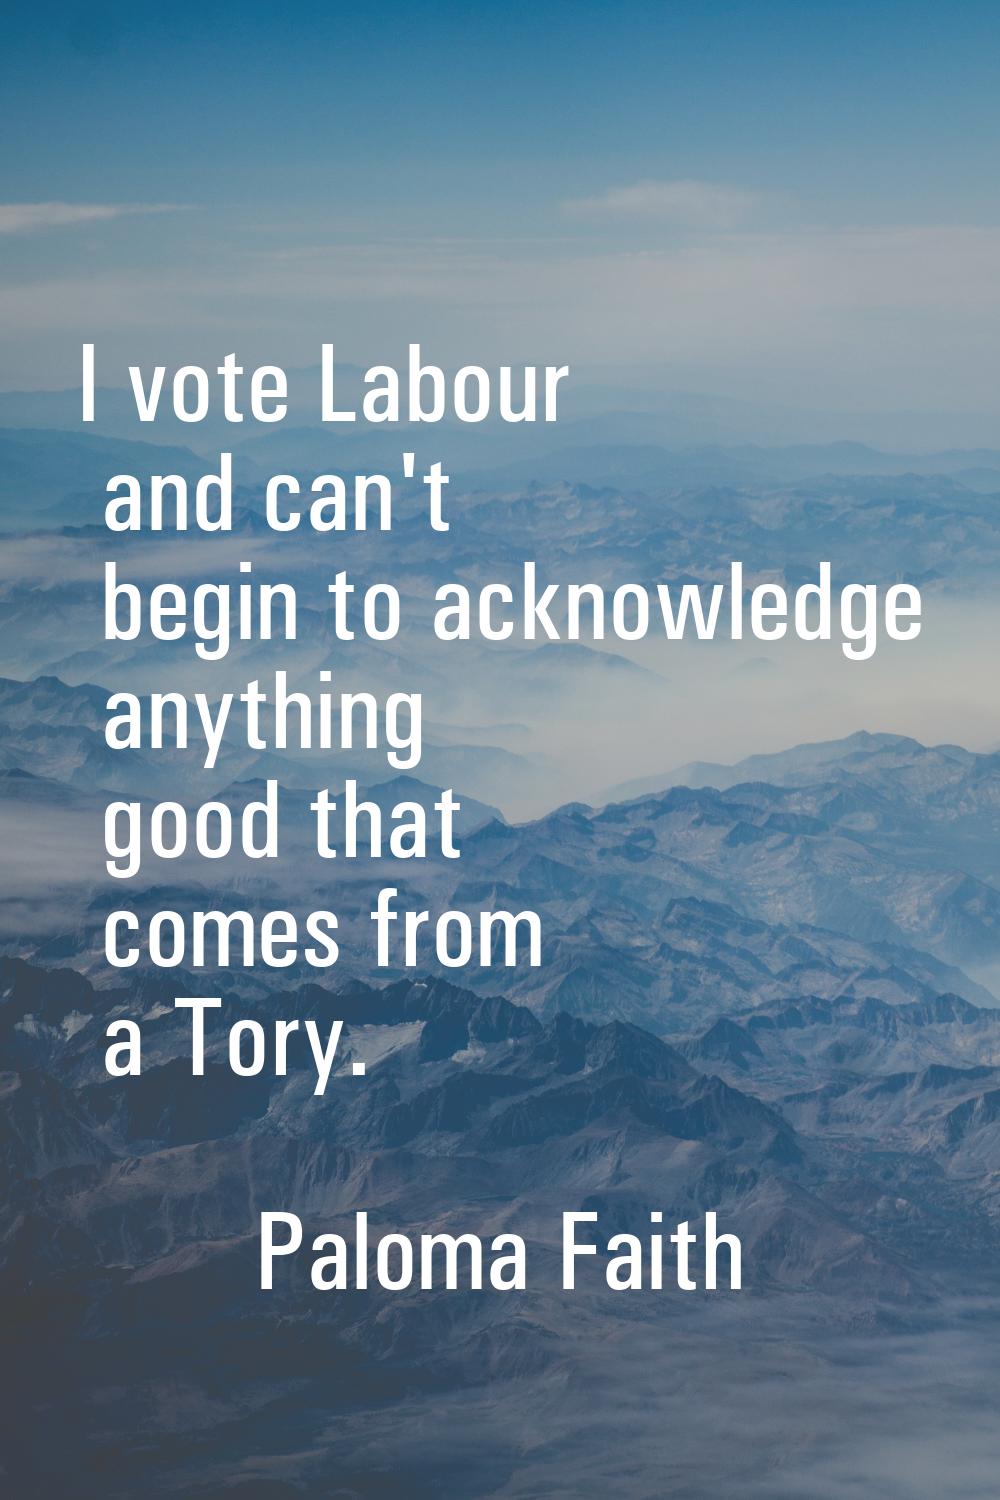 I vote Labour and can't begin to acknowledge anything good that comes from a Tory.